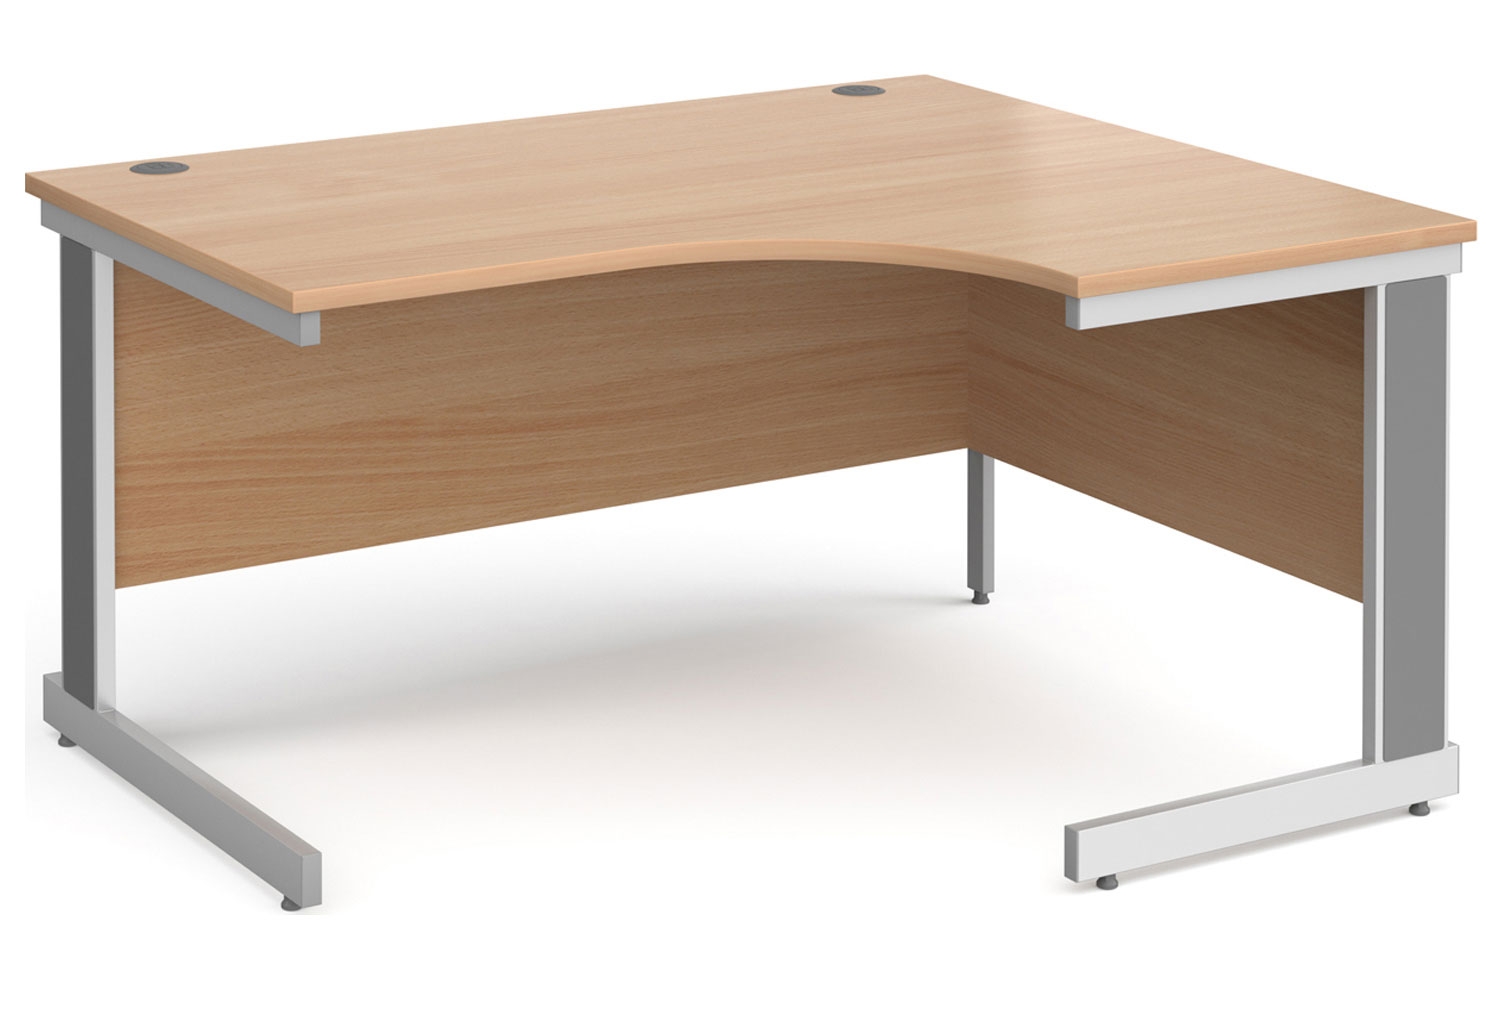 Tully Deluxe Right Hand Ergonomic Office Desk, 140wx120/80dx73h (cm), Beech, Express Delivery